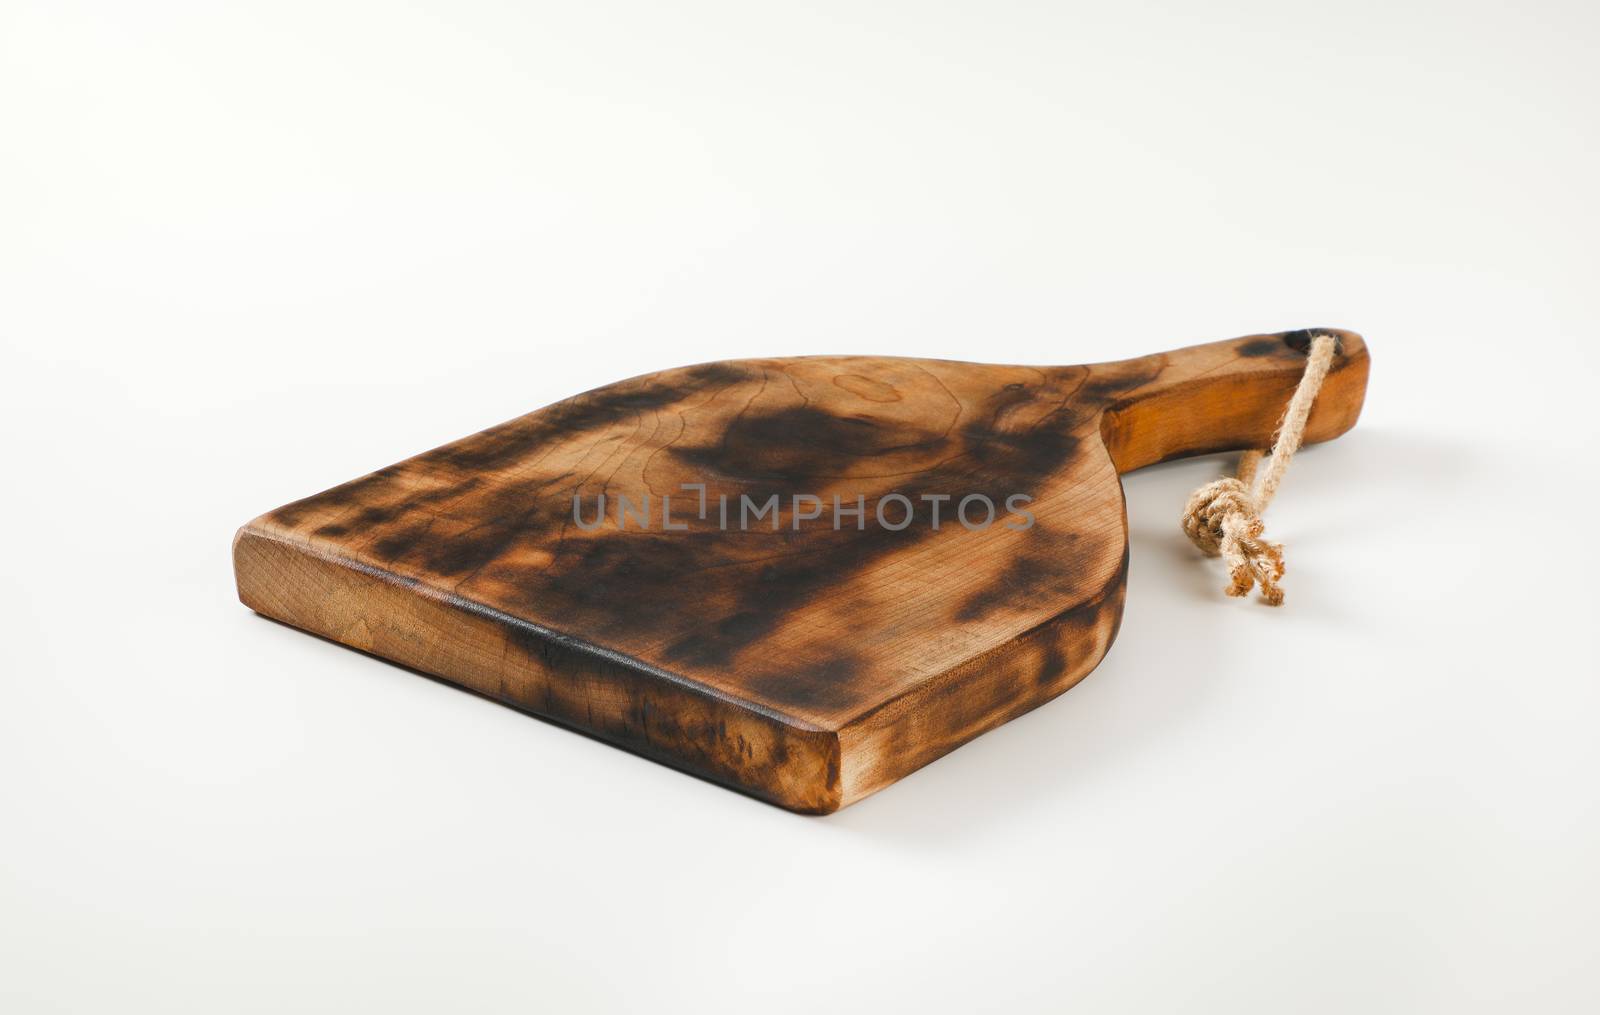 Rustic paddle shaped cutting board by Digifoodstock